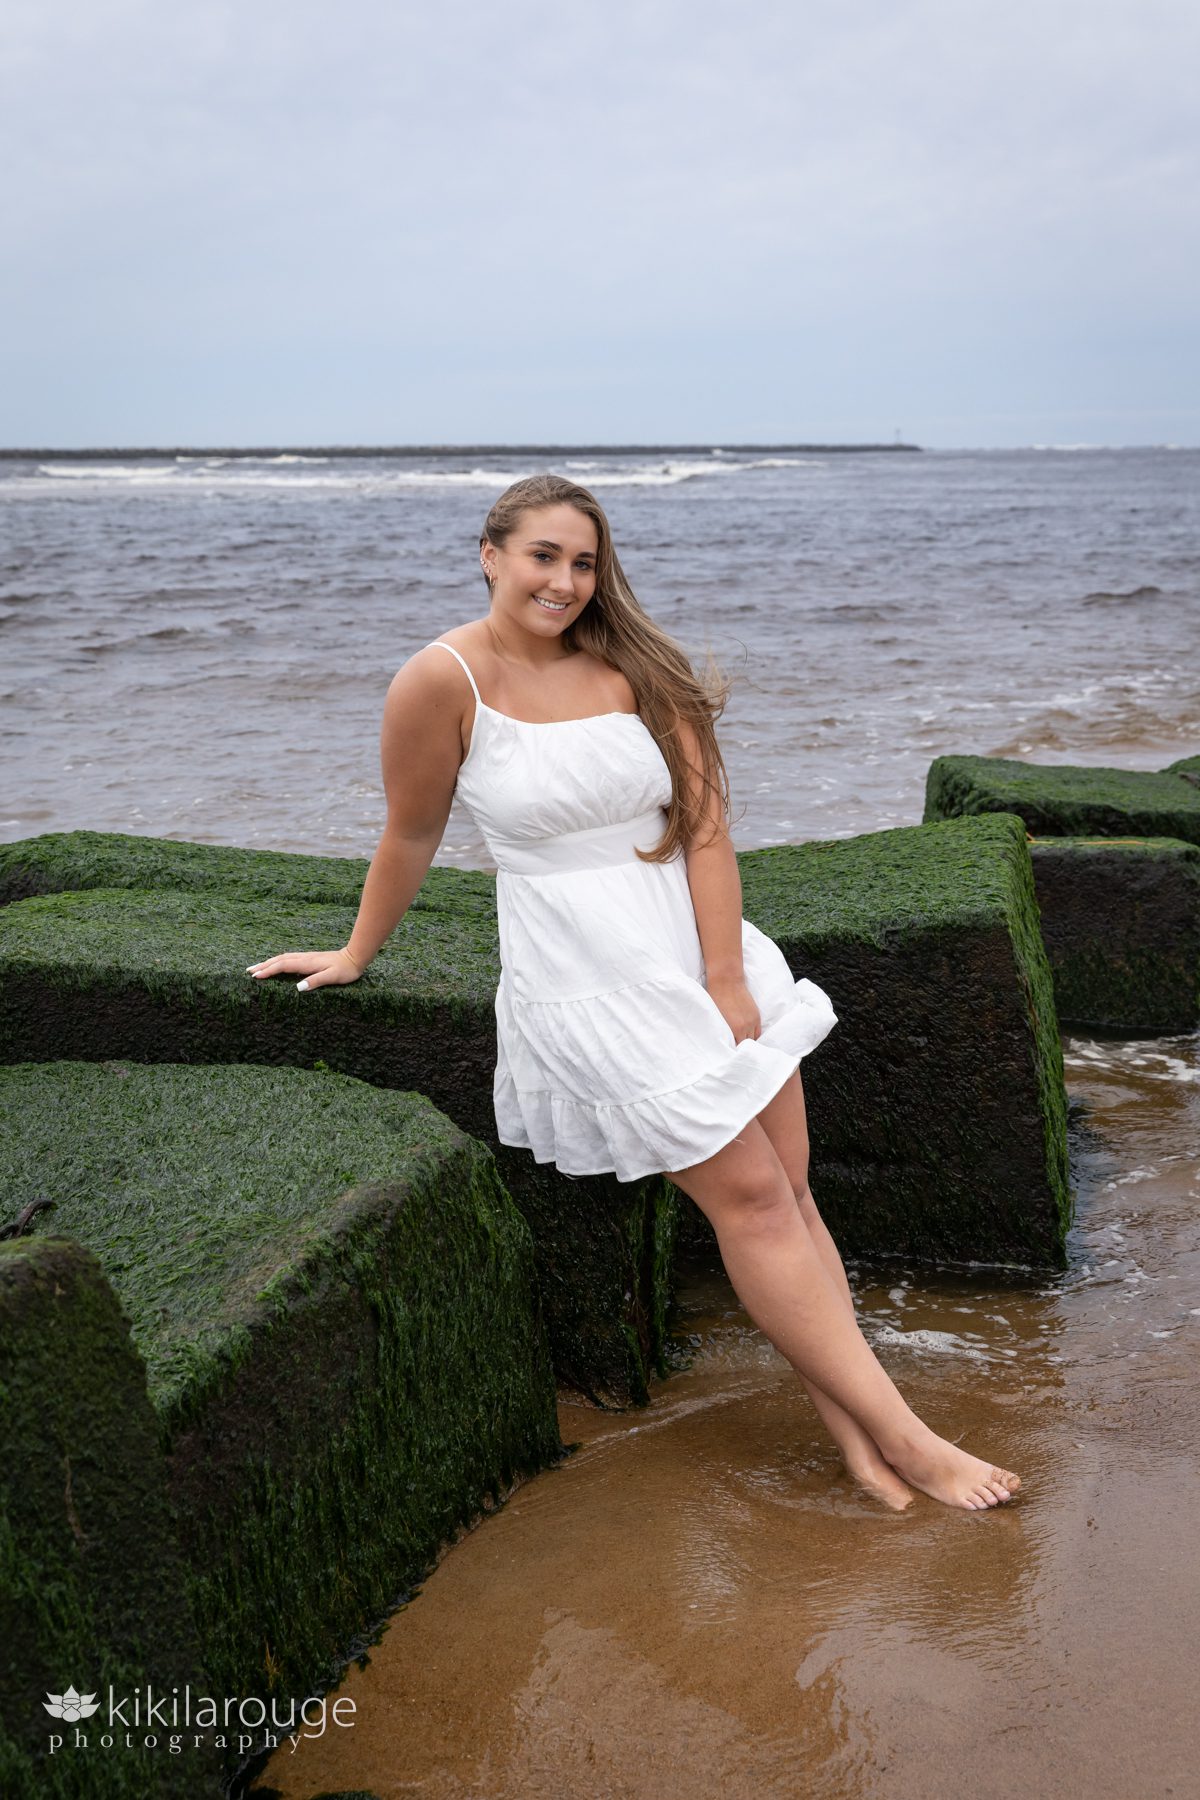 Triton Senior Portrait Girl in Jeans with white top tied in back at beach sitting on green seaweed covered blocks